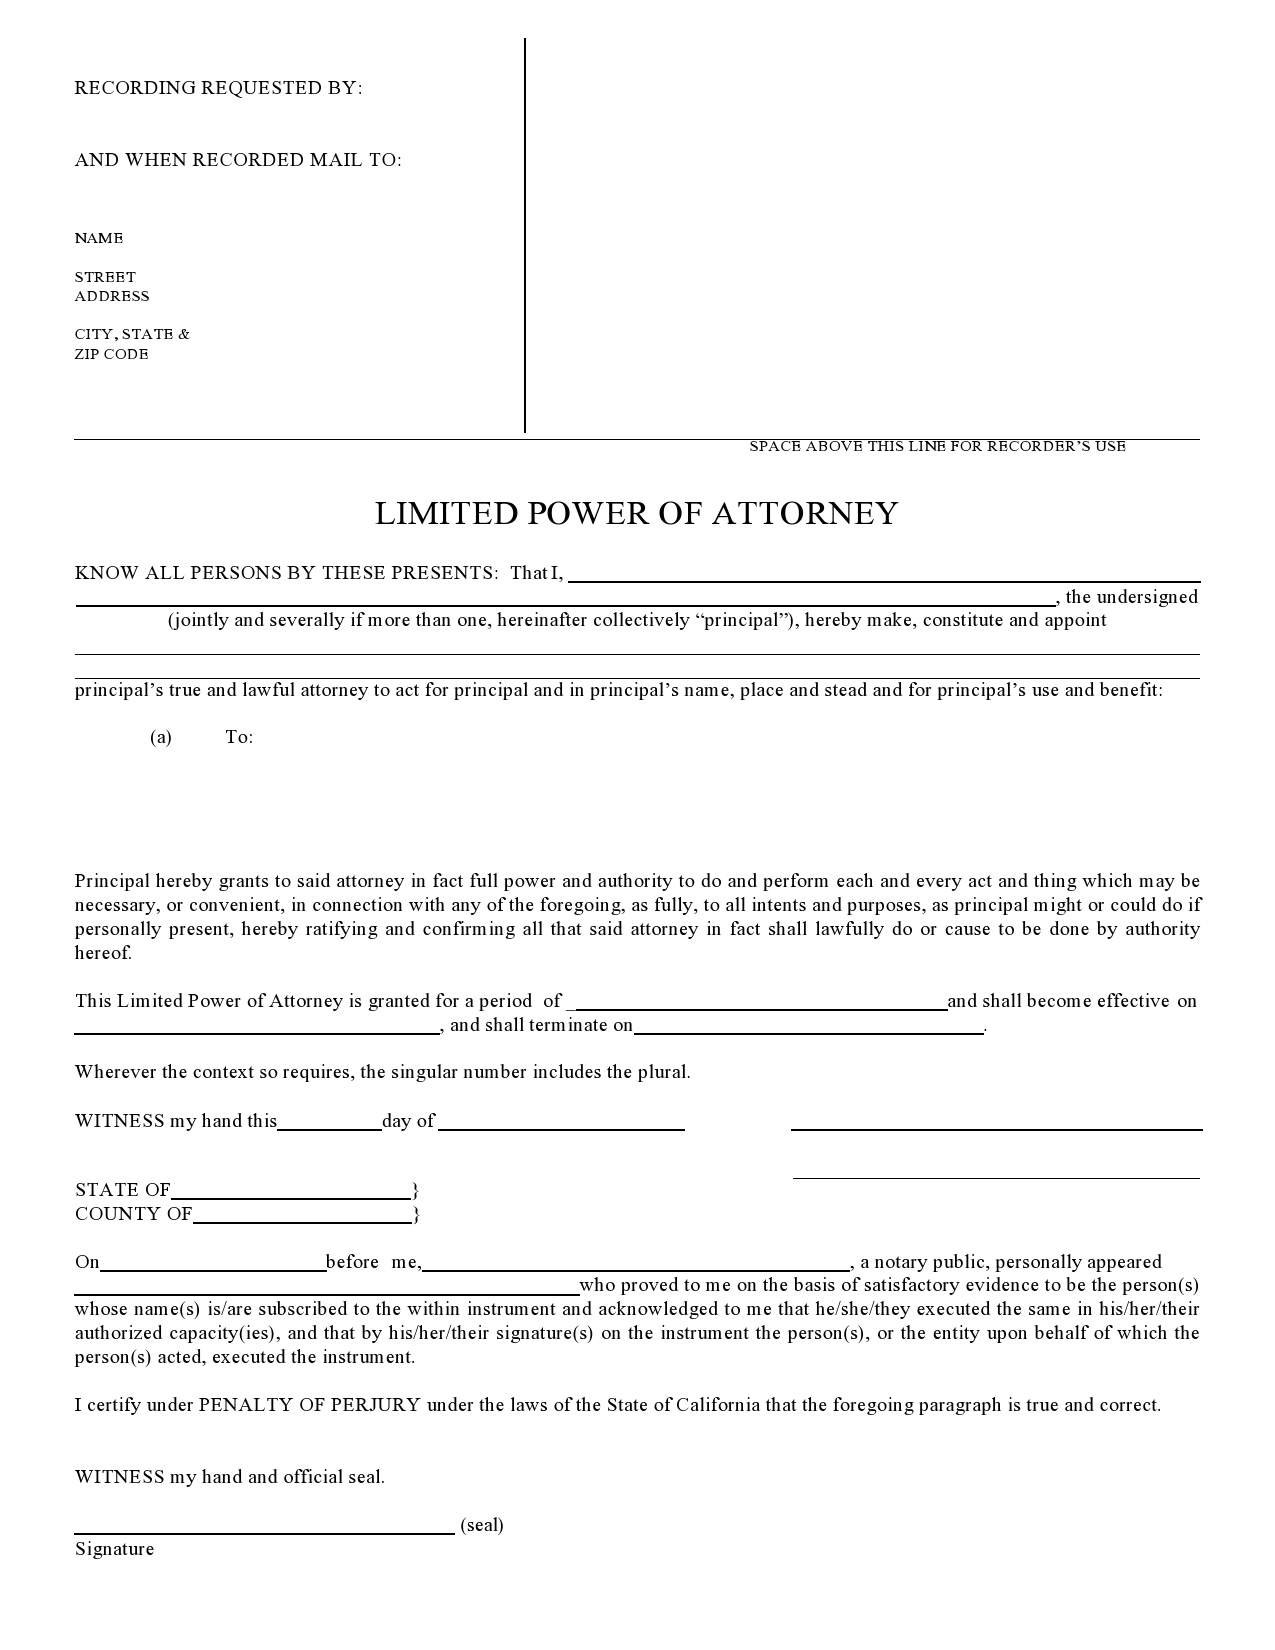 Free limited power of attorney 18